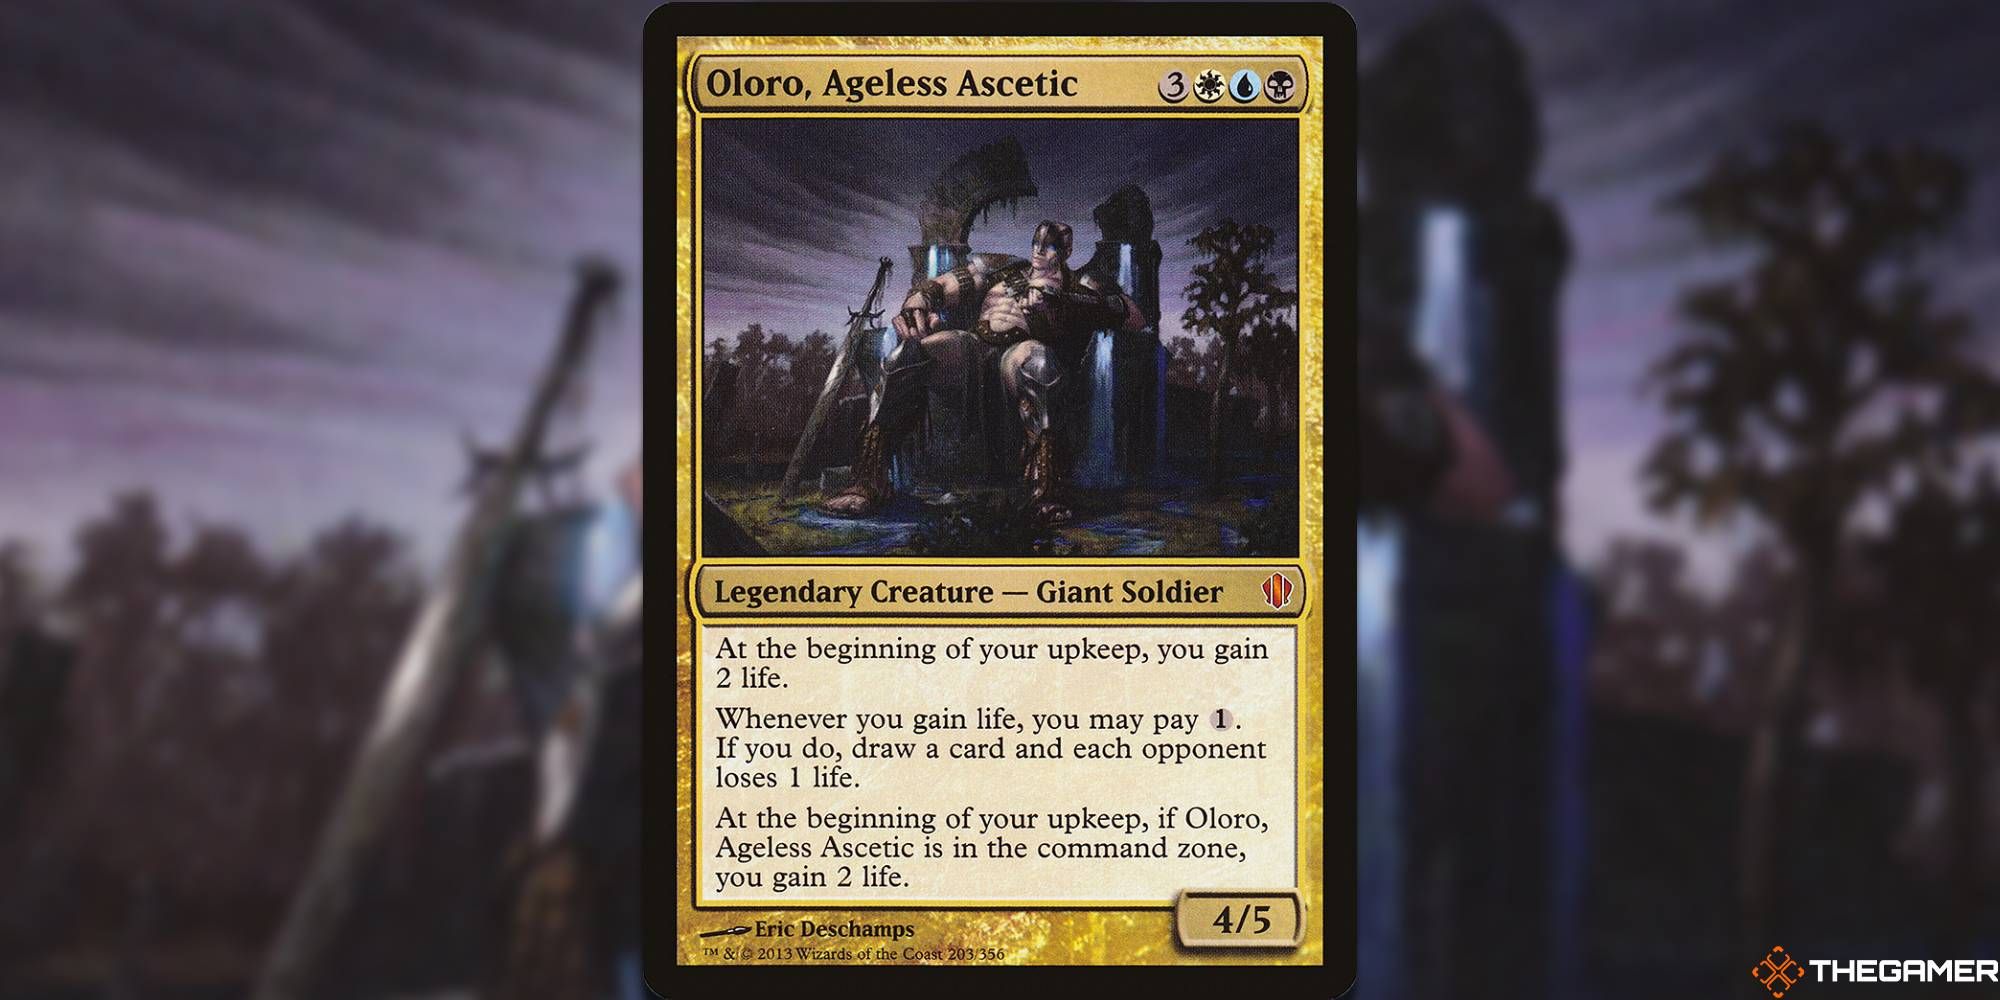 Image of the Oloro Ageless Ascetic card in Magic: The Gathering, with art